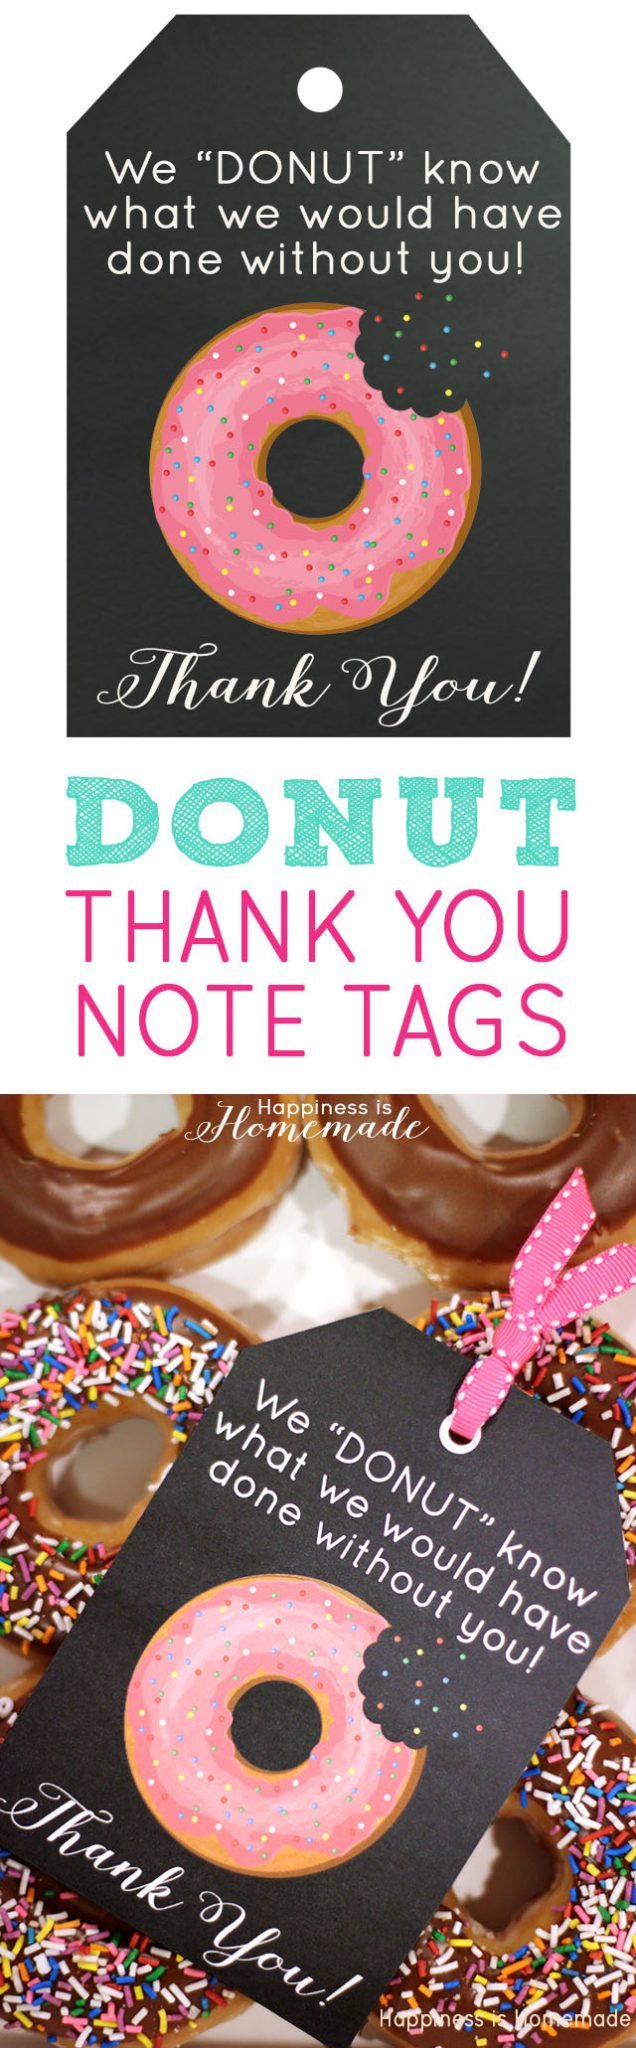 Teacher Appreciation Gift Ideas and Free Printables Donut Thank You Note tags - Free Downloadble Printable